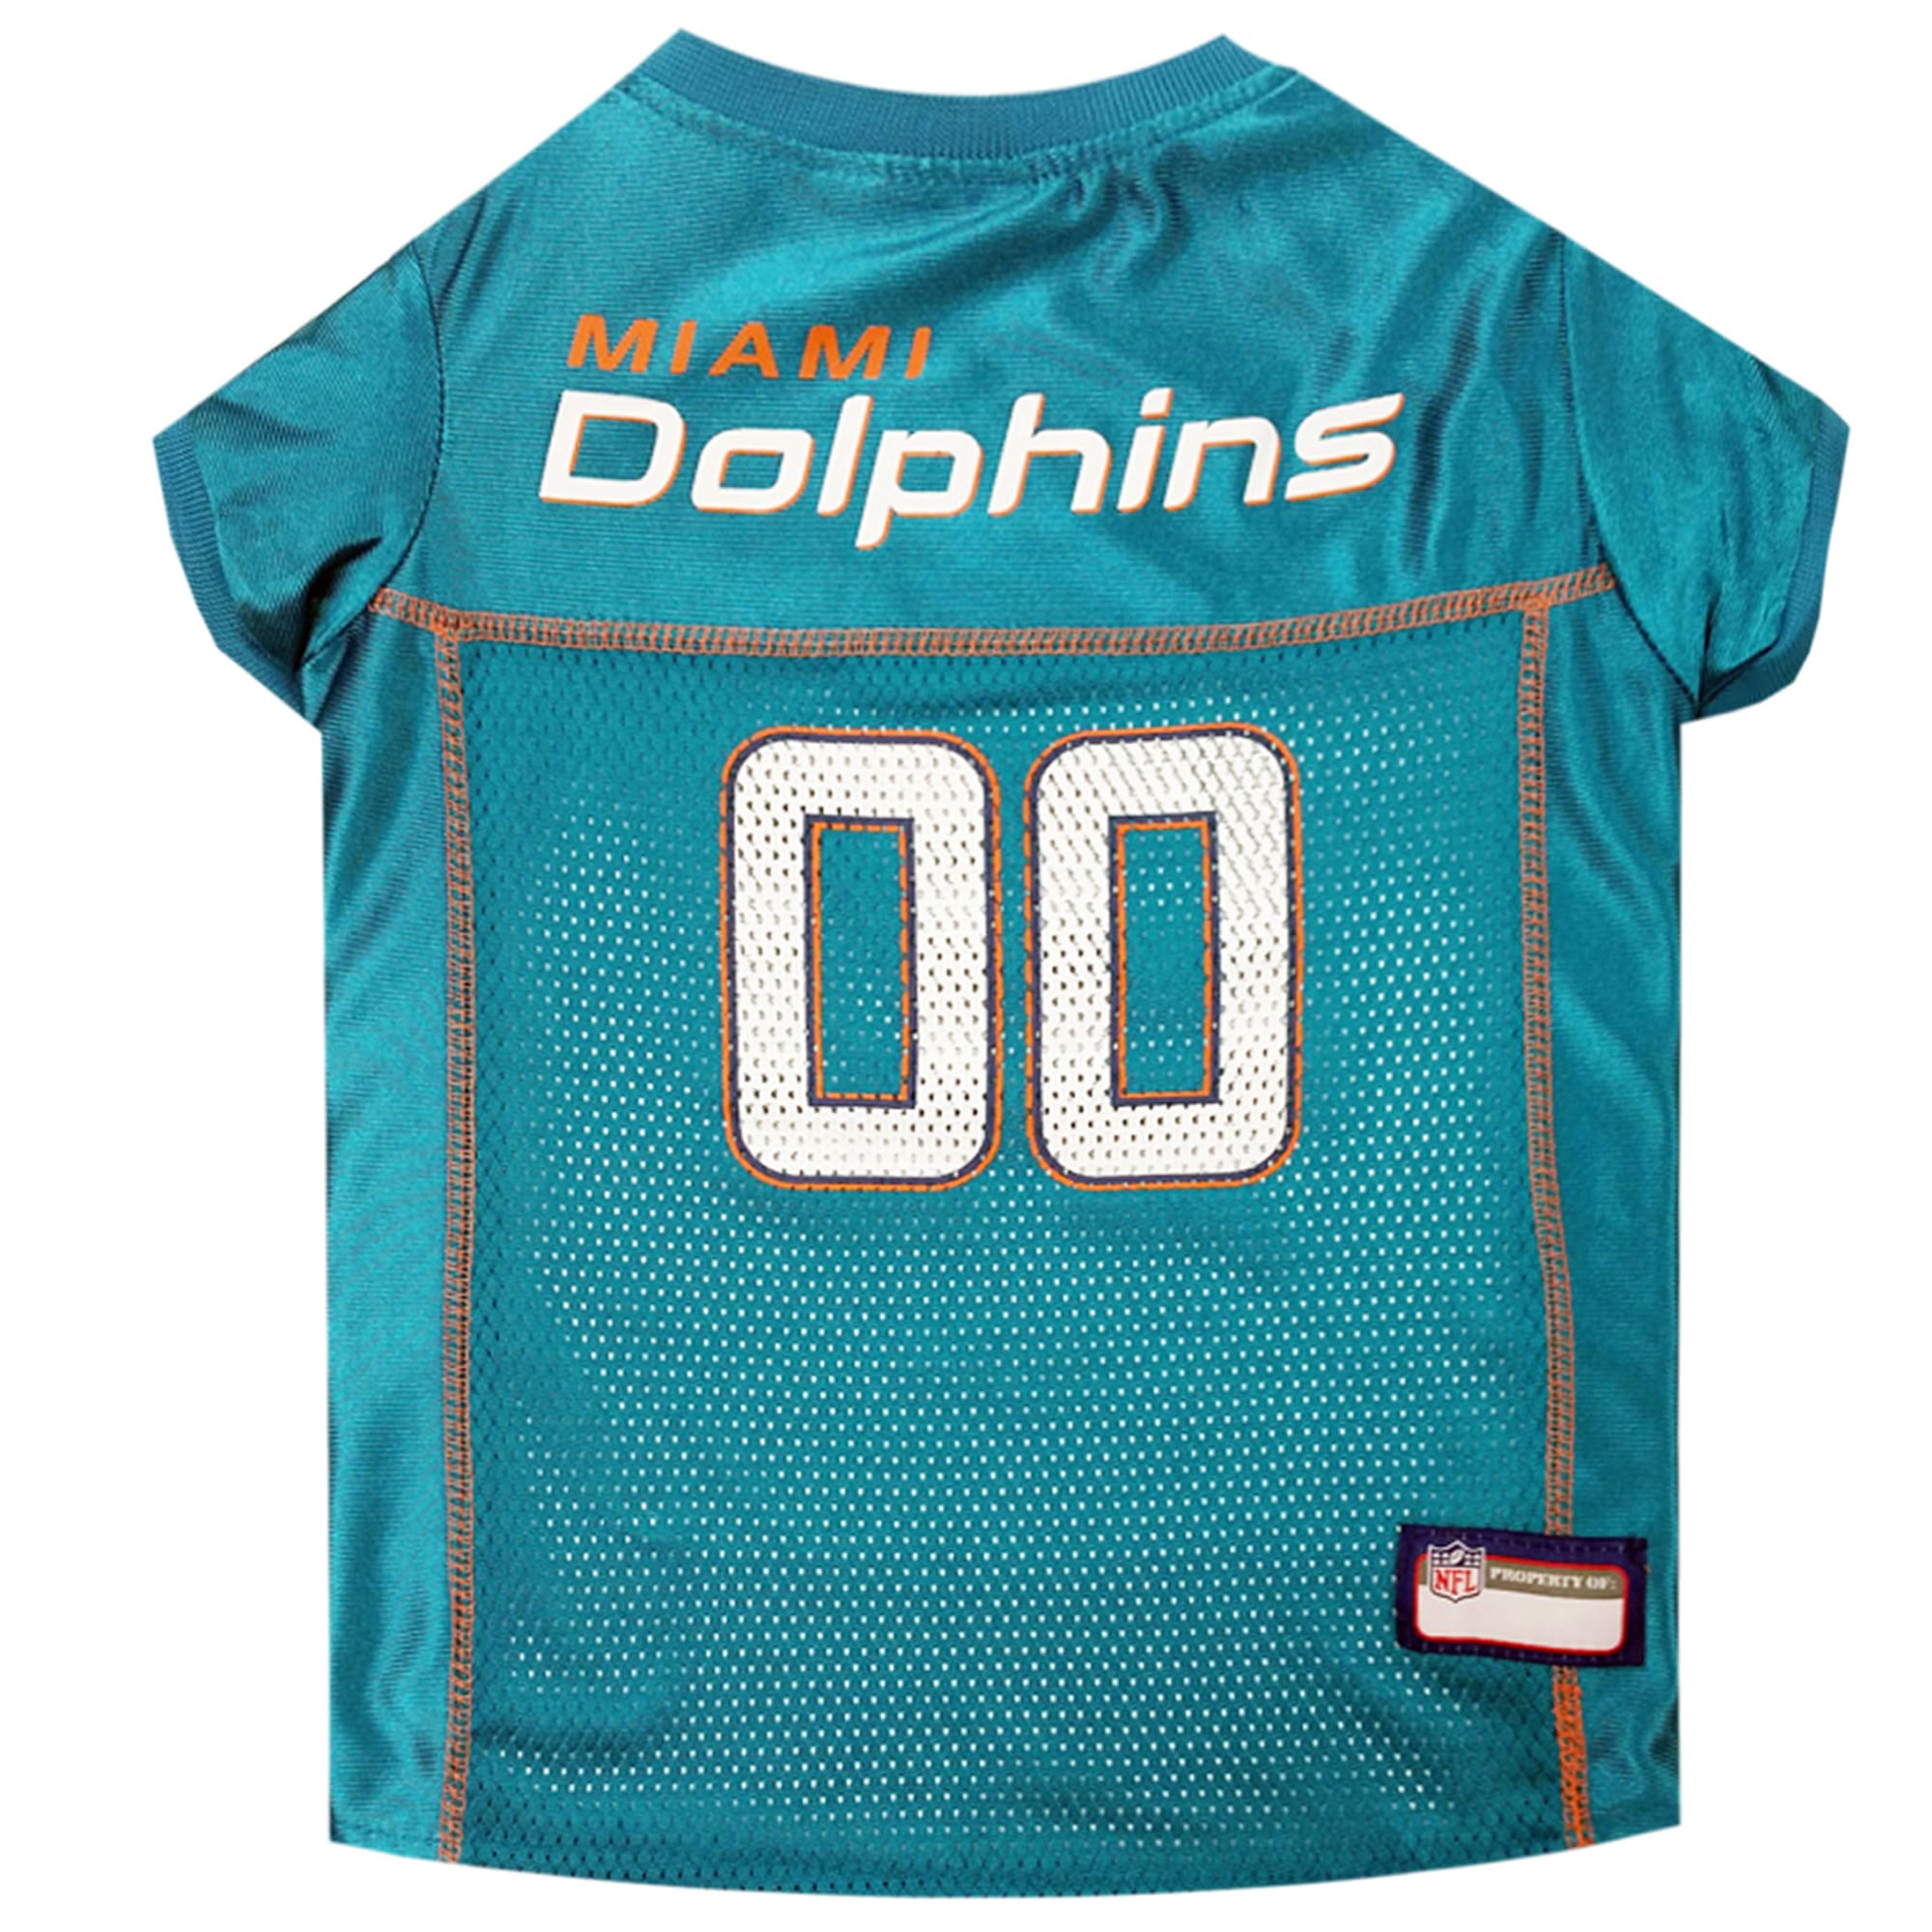 miami dolphins official jersey